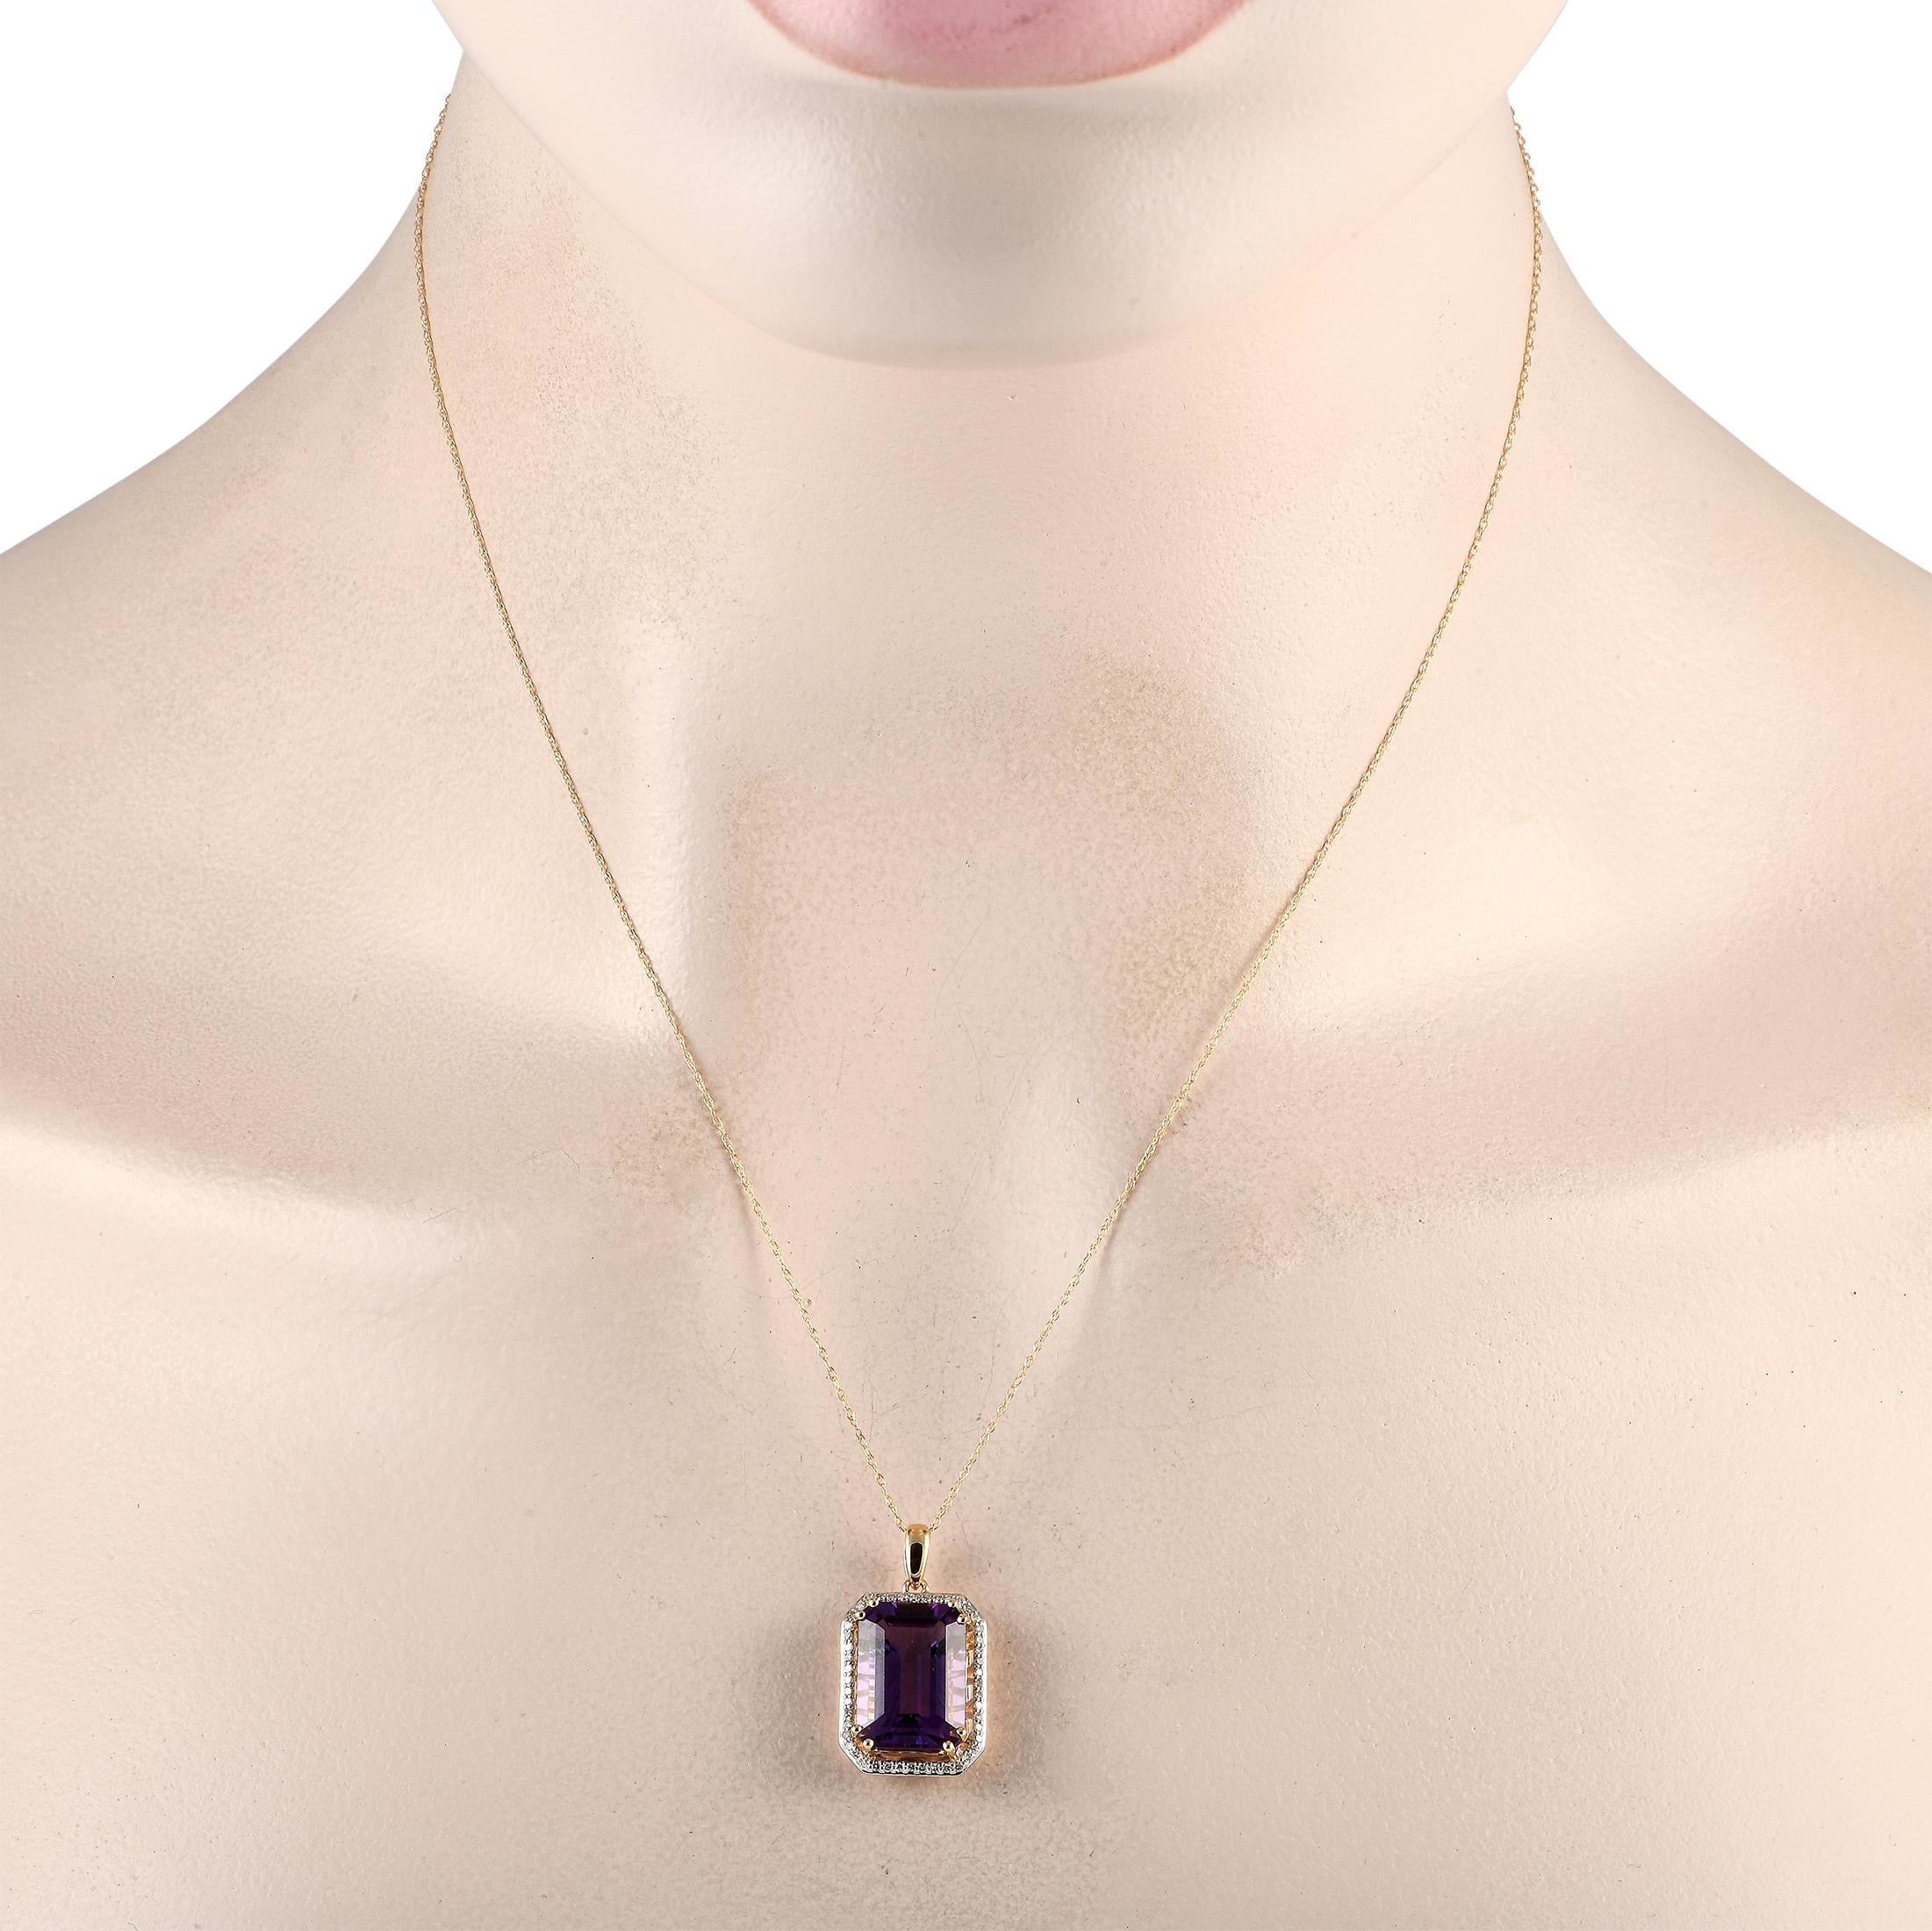 A bold Amethyst gemstone serves as a stunning focal point on this elegant necklace. Crafted from 14K yellow gold, this pieces pendant measures 1.0 long by 0.50 wide and is suspended from a delicate 18 chain. Sparkling diamonds with a total weight of